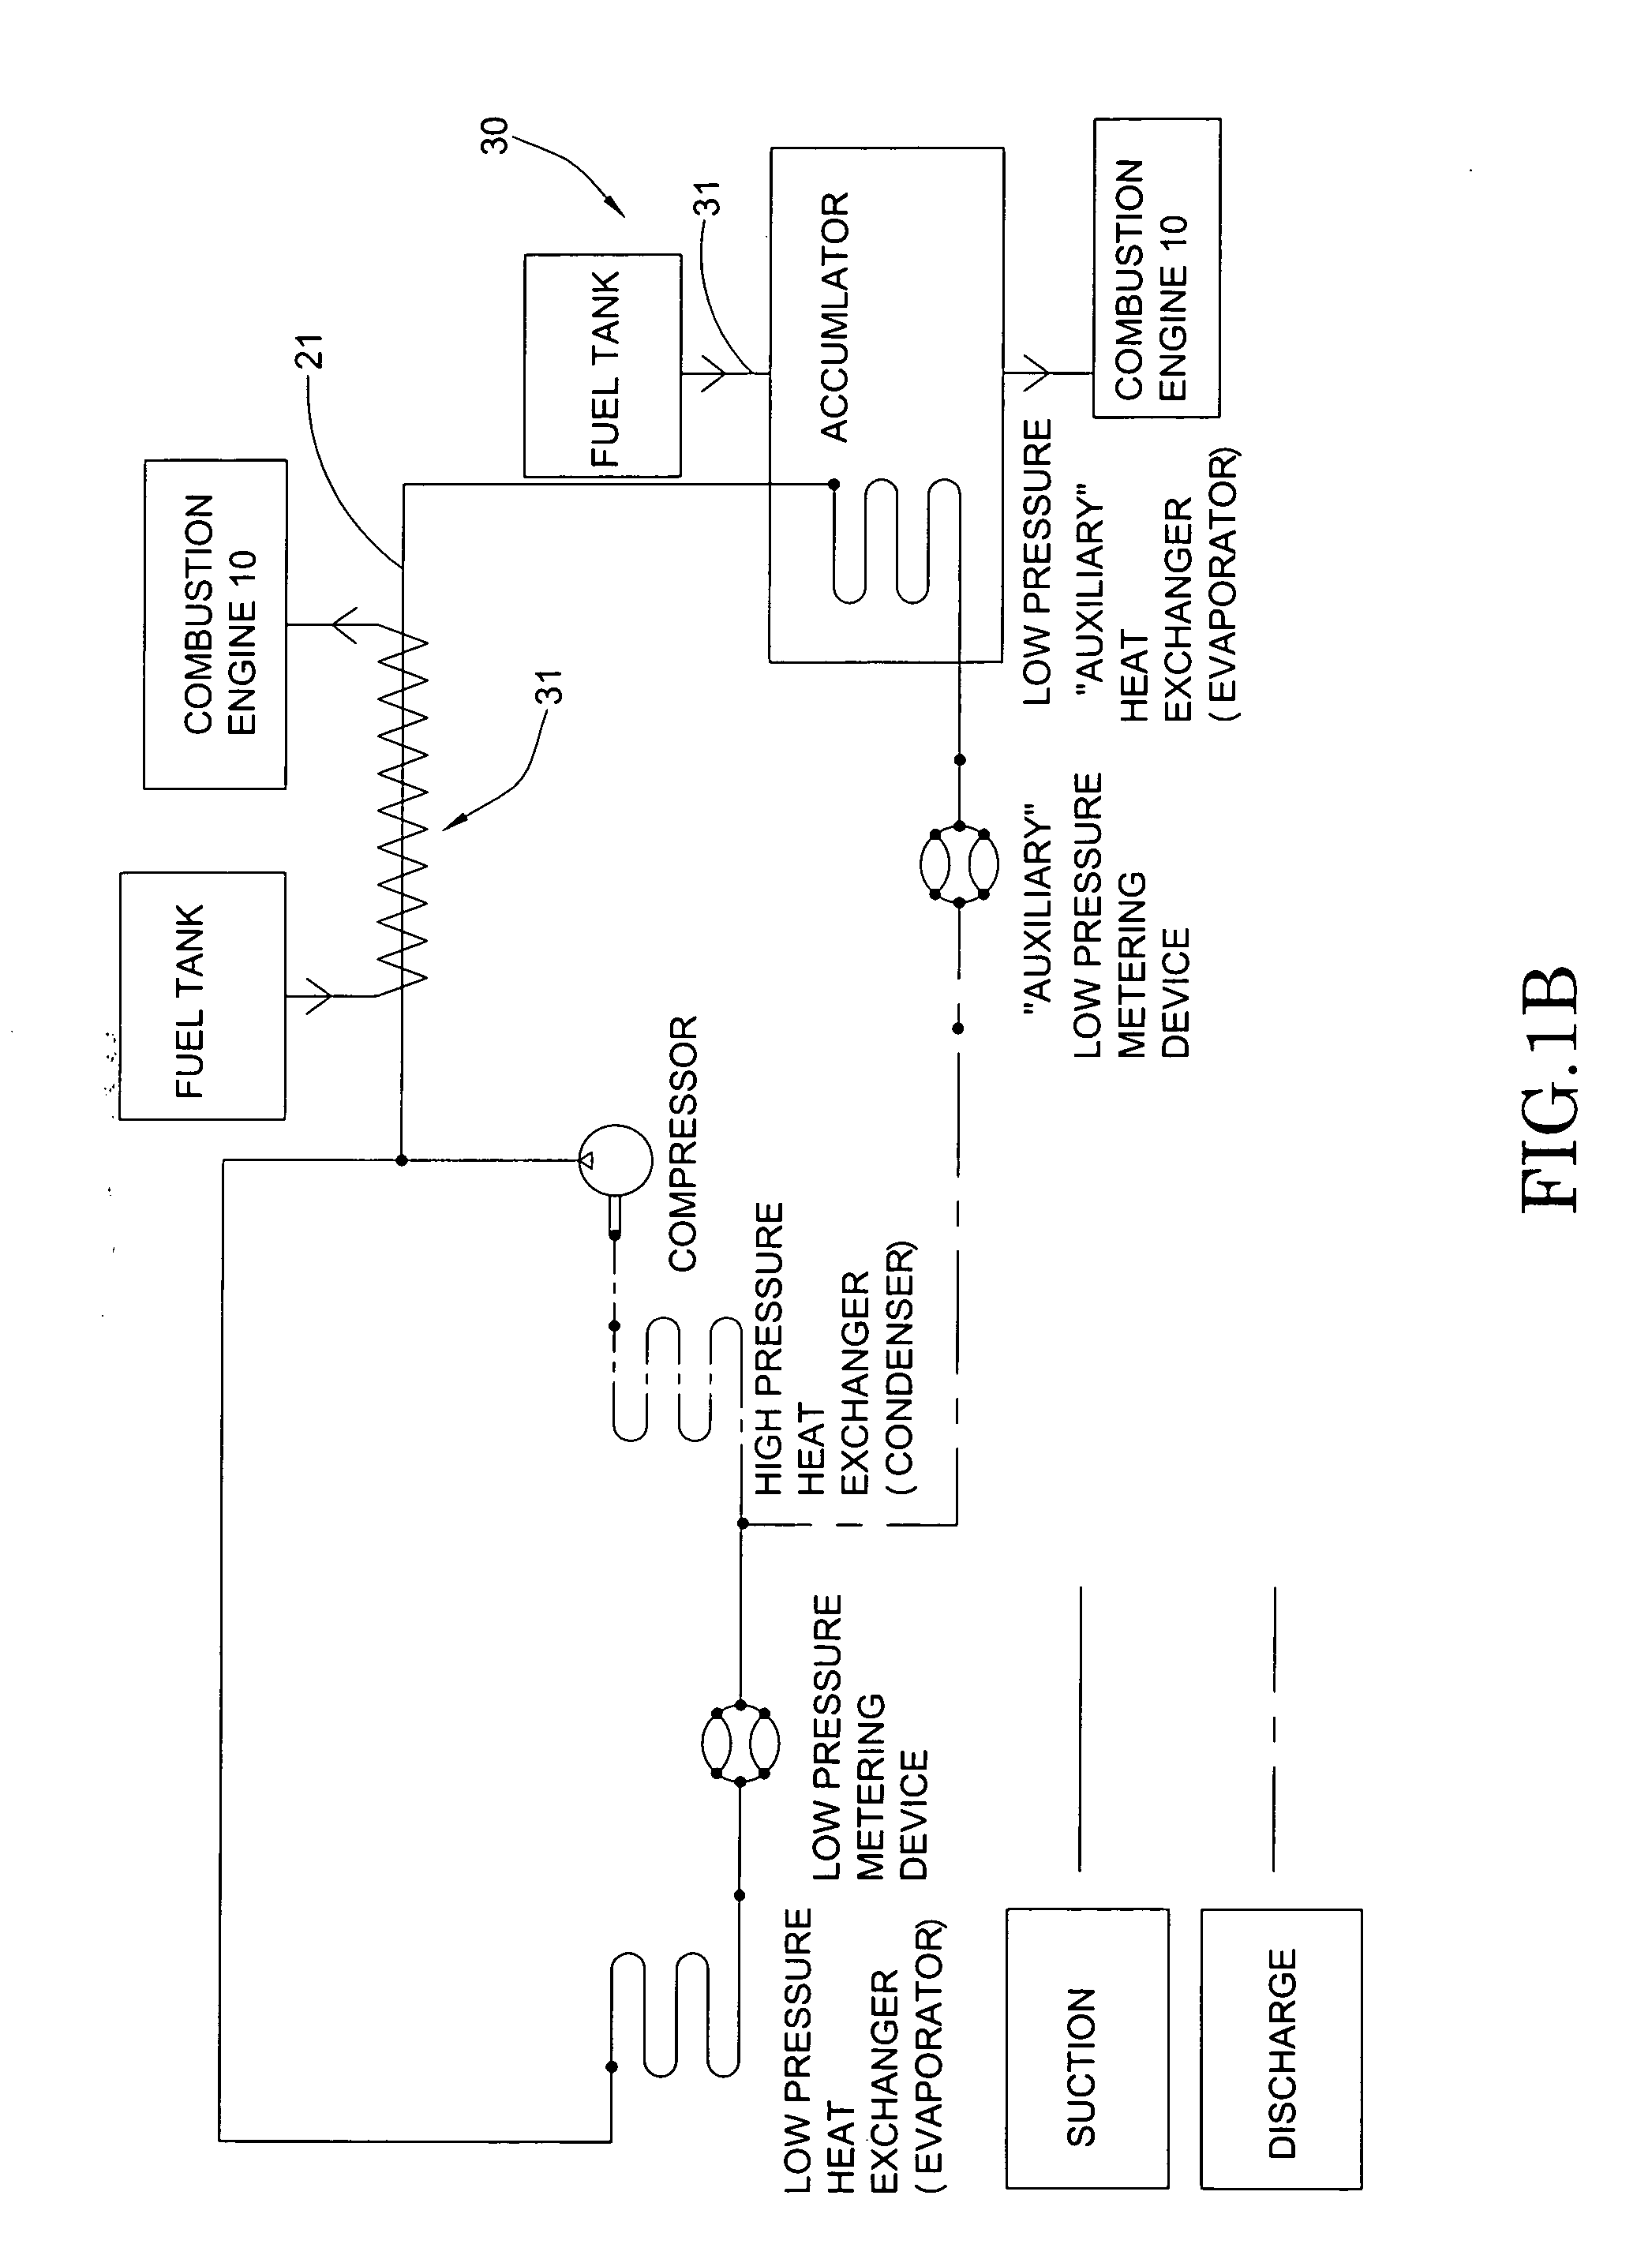 Intake enhancement system for a vehicle